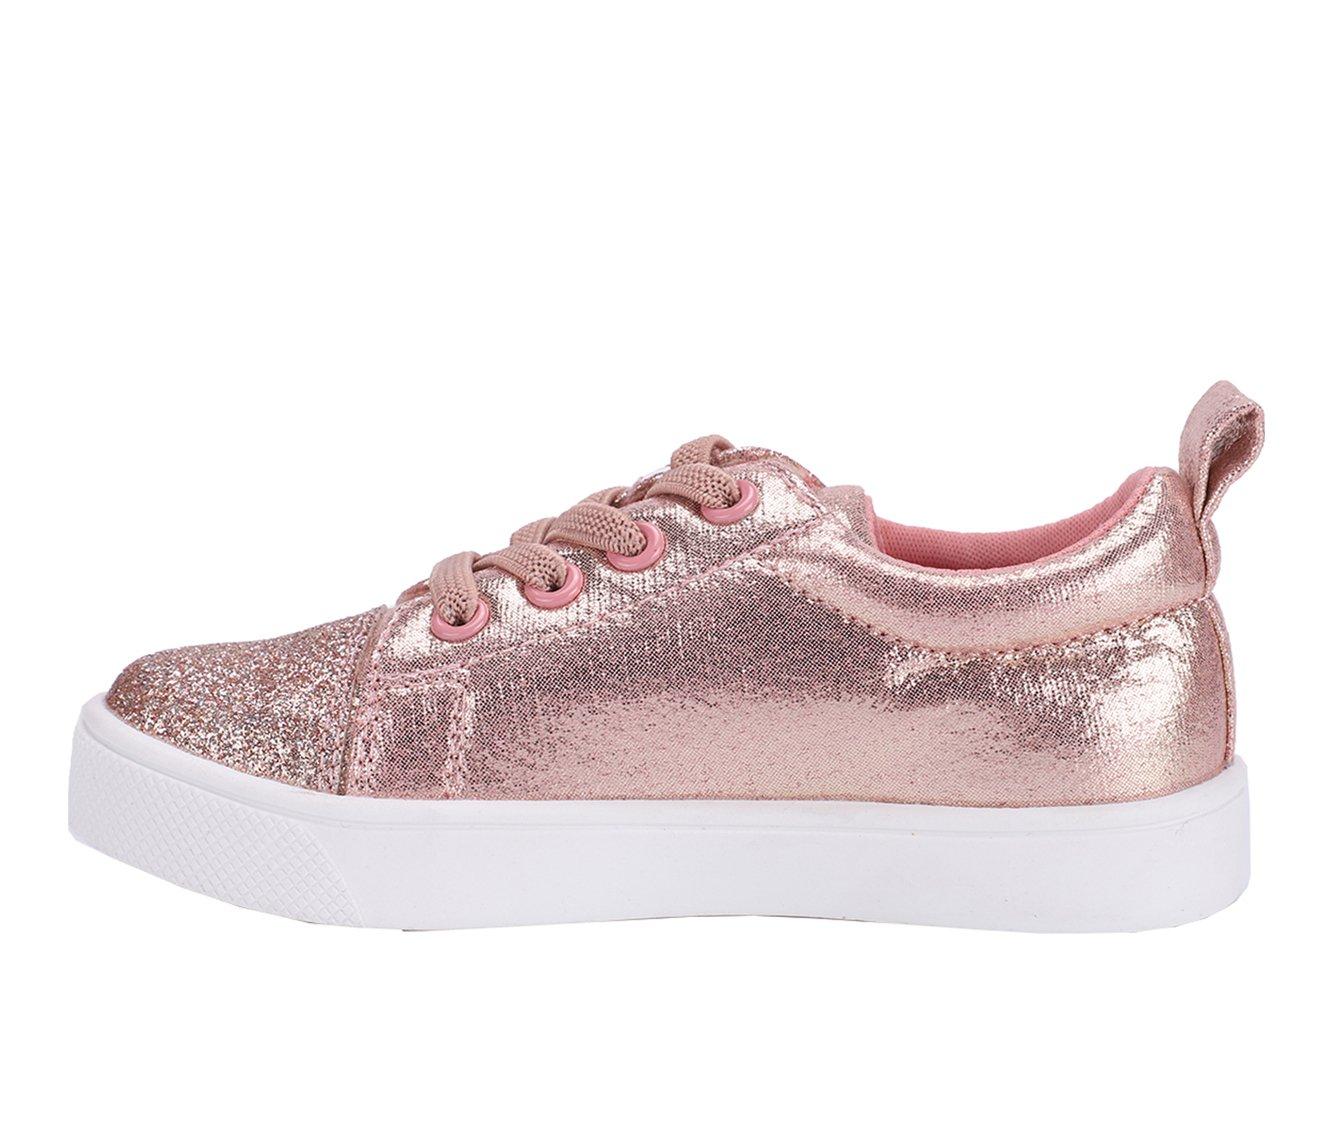 Girls' Oomphies Toddler & Little Kid Danica Fashion Sneakers